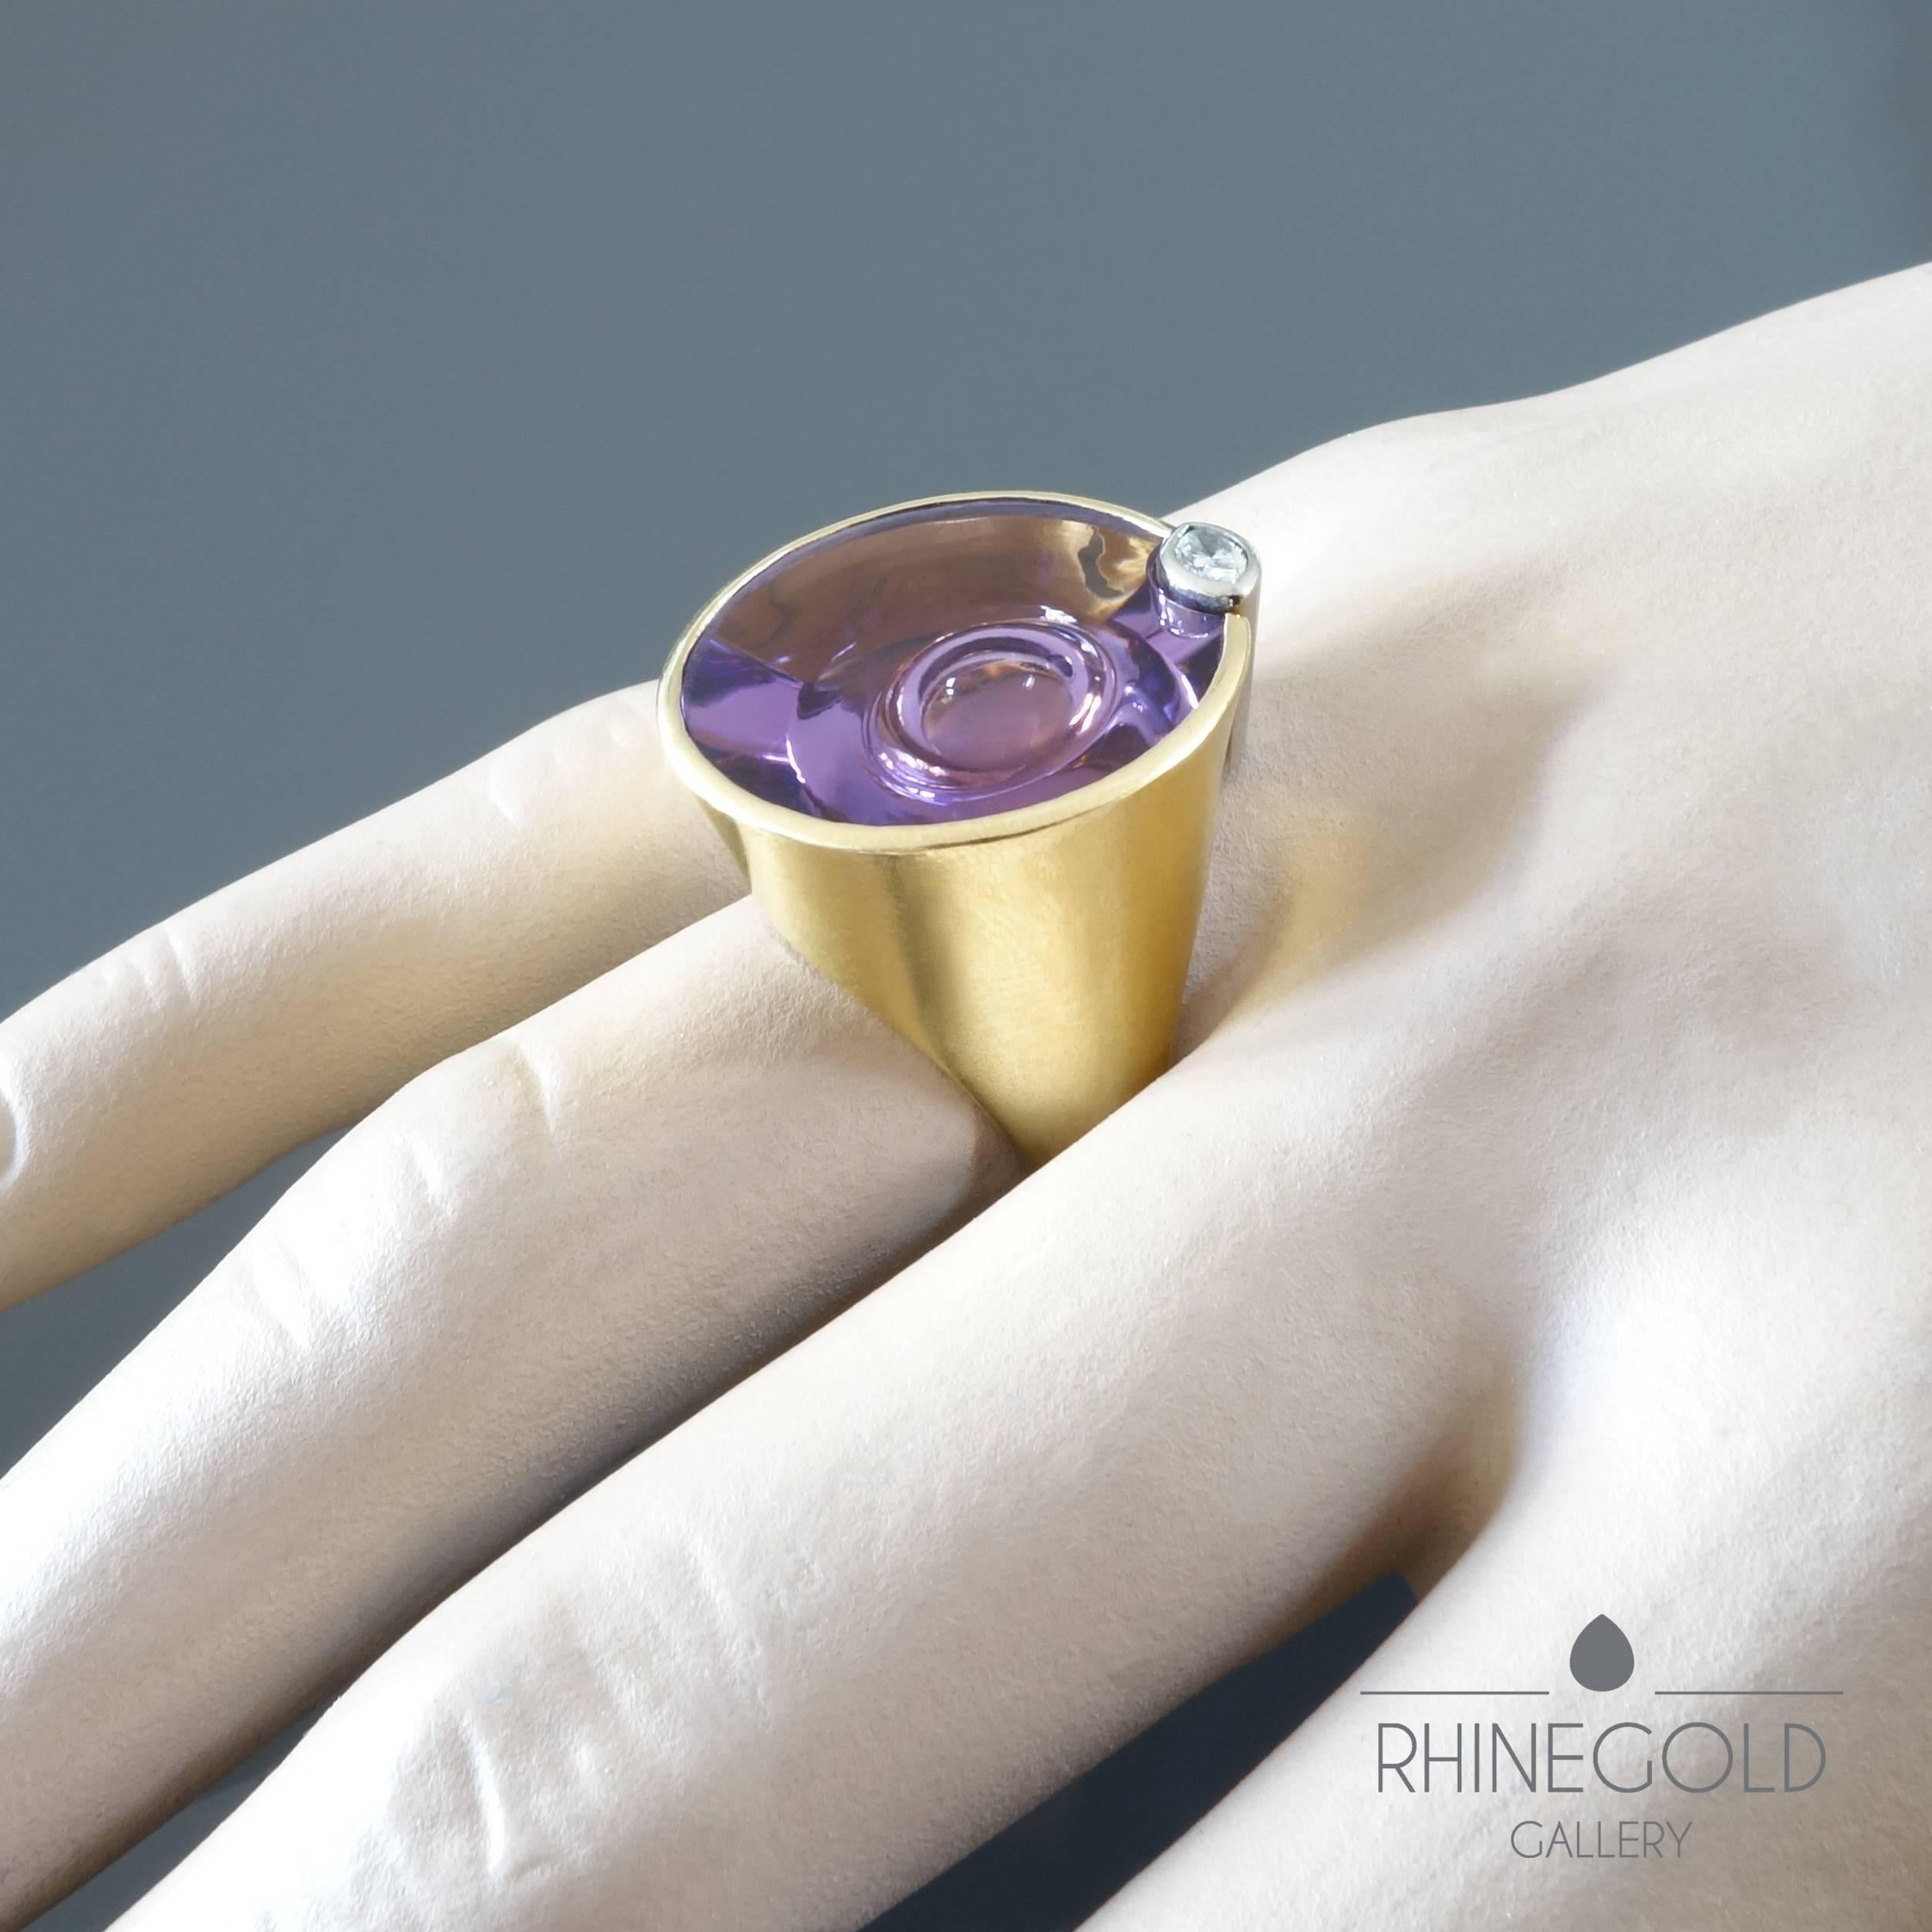 Atelier Munsteiner Amethyst Diamond Yellow and White Gold Cocktail Ring 
18k white and yellow gold, amethyst (approx. 22 ct.), diamond (G, vs, approx. 0.1 ct.)
Ring head 2.15 by 2.25 cm (approx. 13/16” by 7/8”)
Ring size: Ø 17.7 mm = EU 55.7 / US